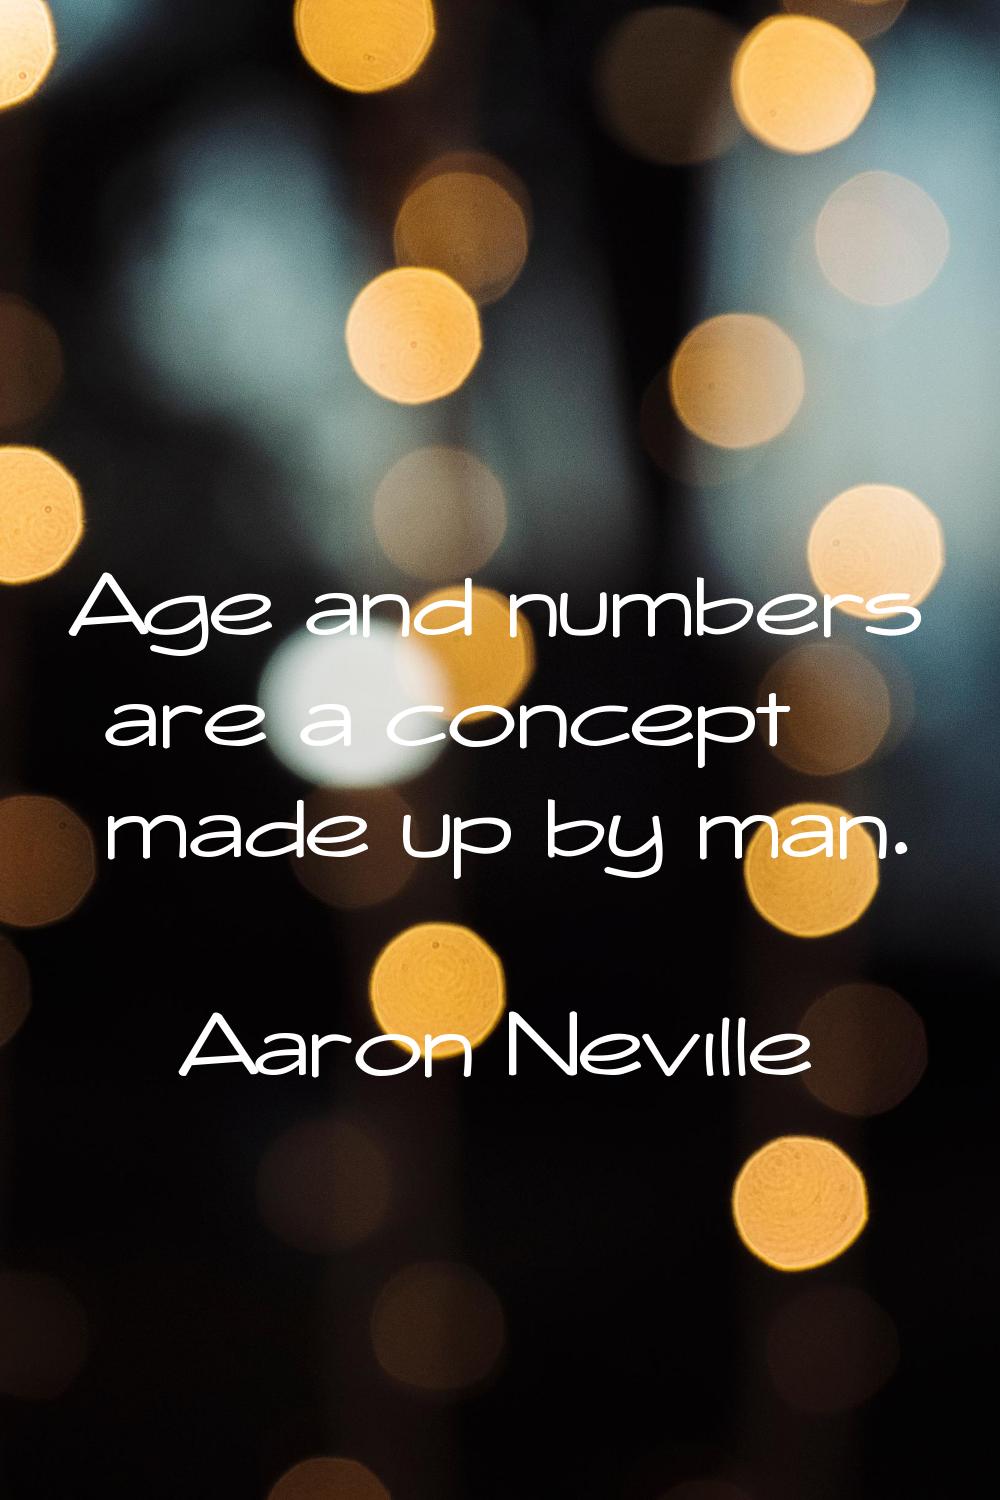 Age and numbers are a concept made up by man.